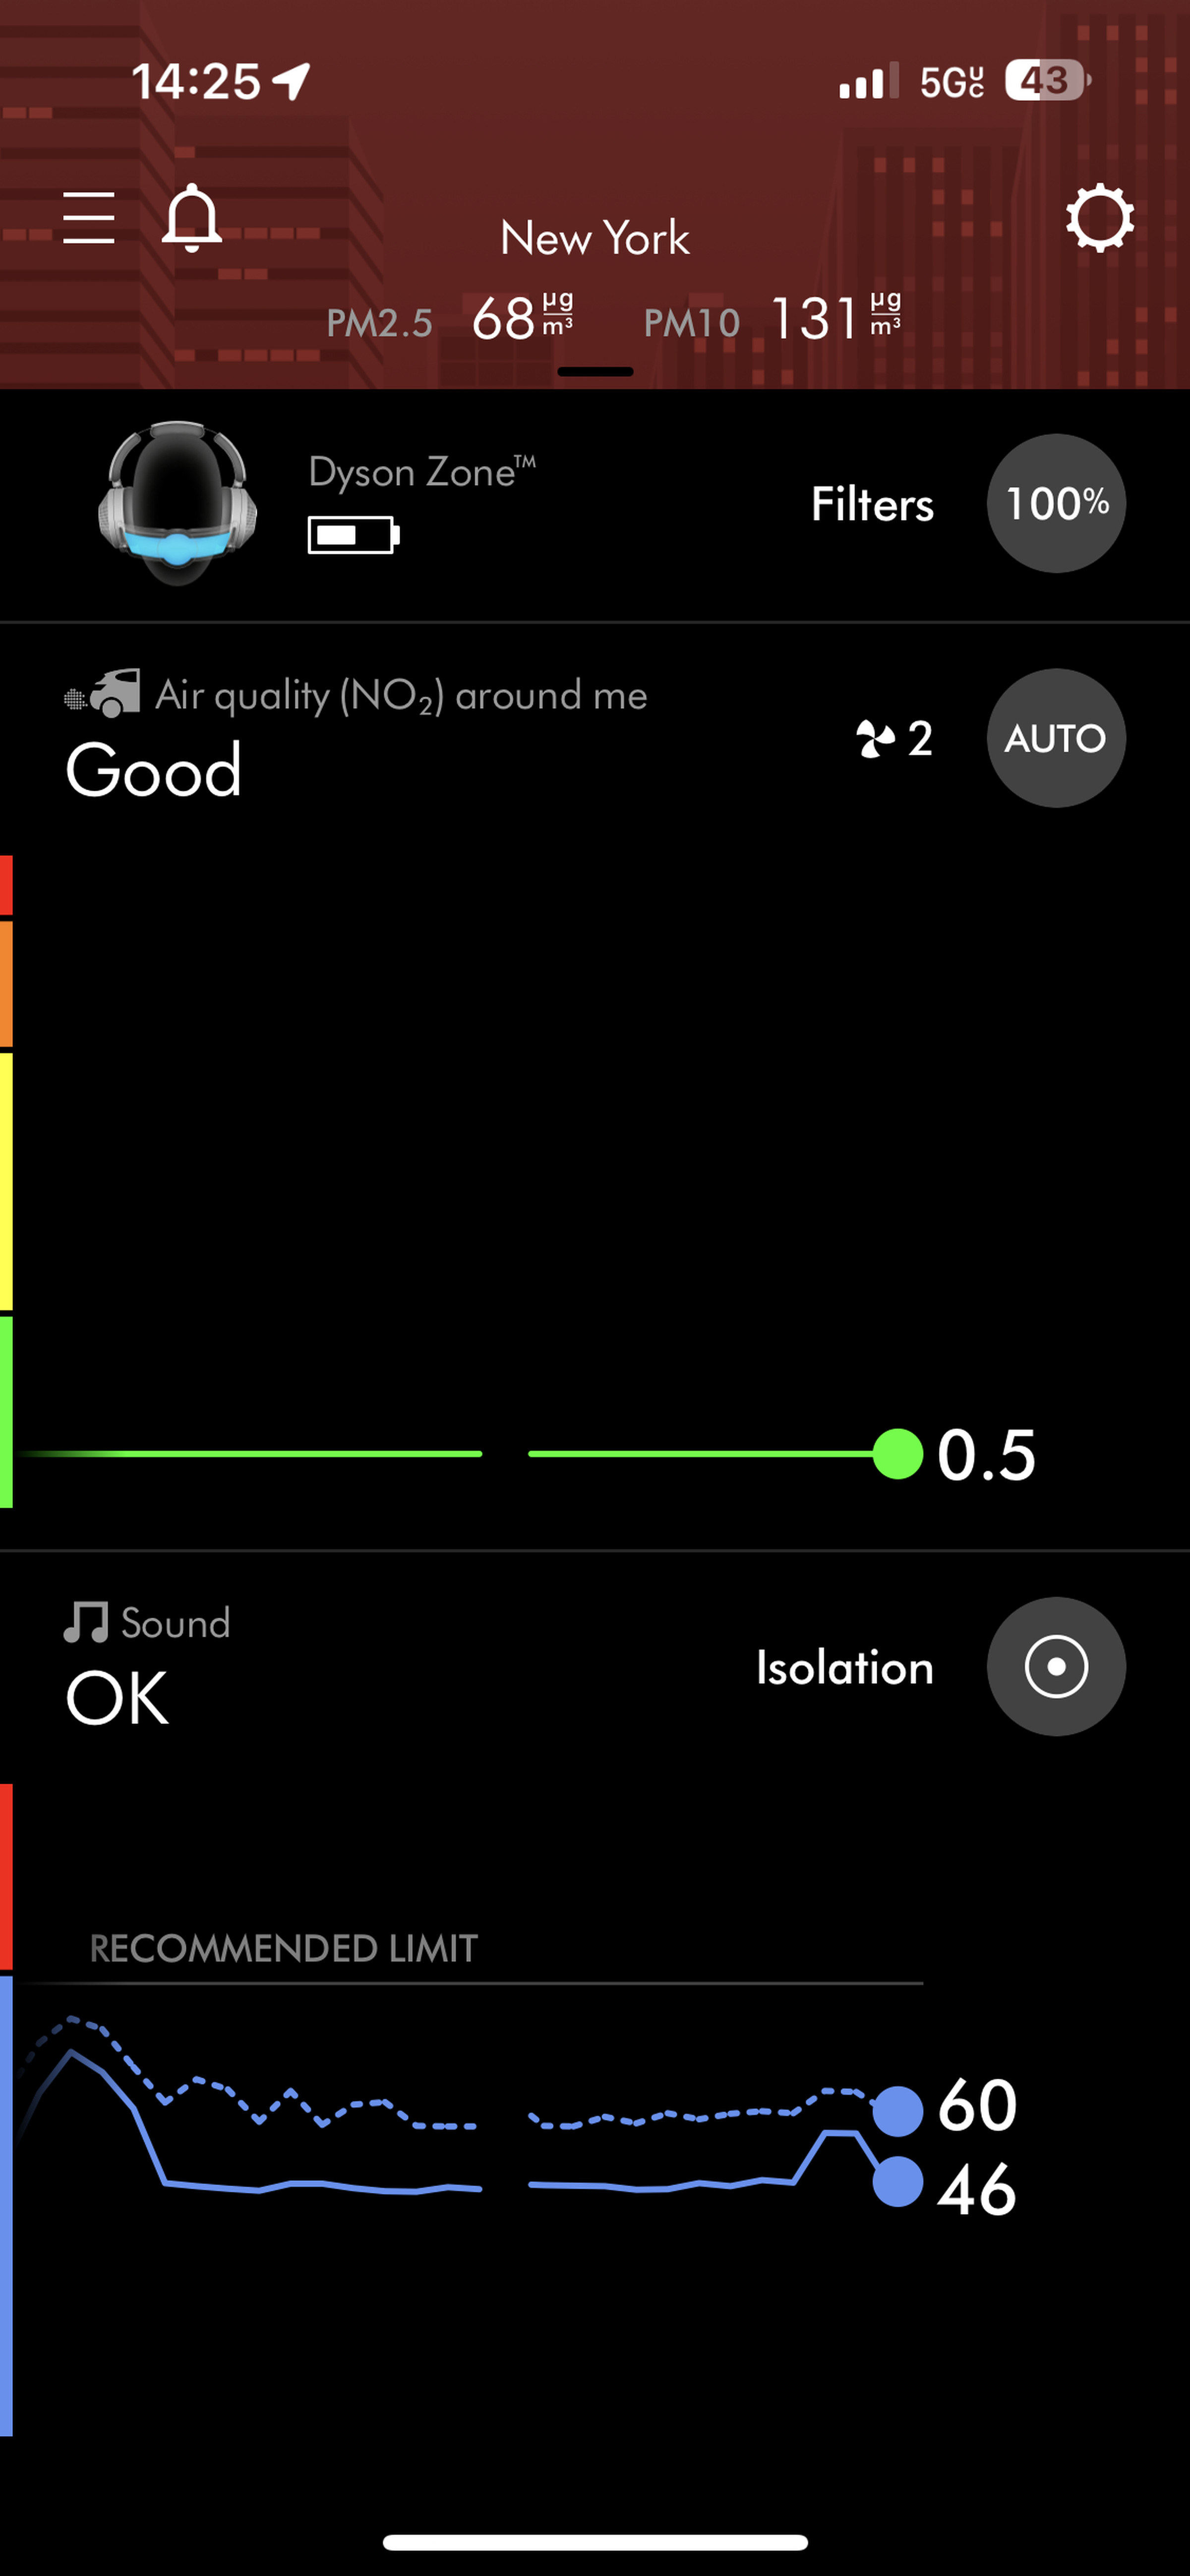 MyDyson app screenshot showing live tracking for noise levels and nitrogen dioxide concentrations